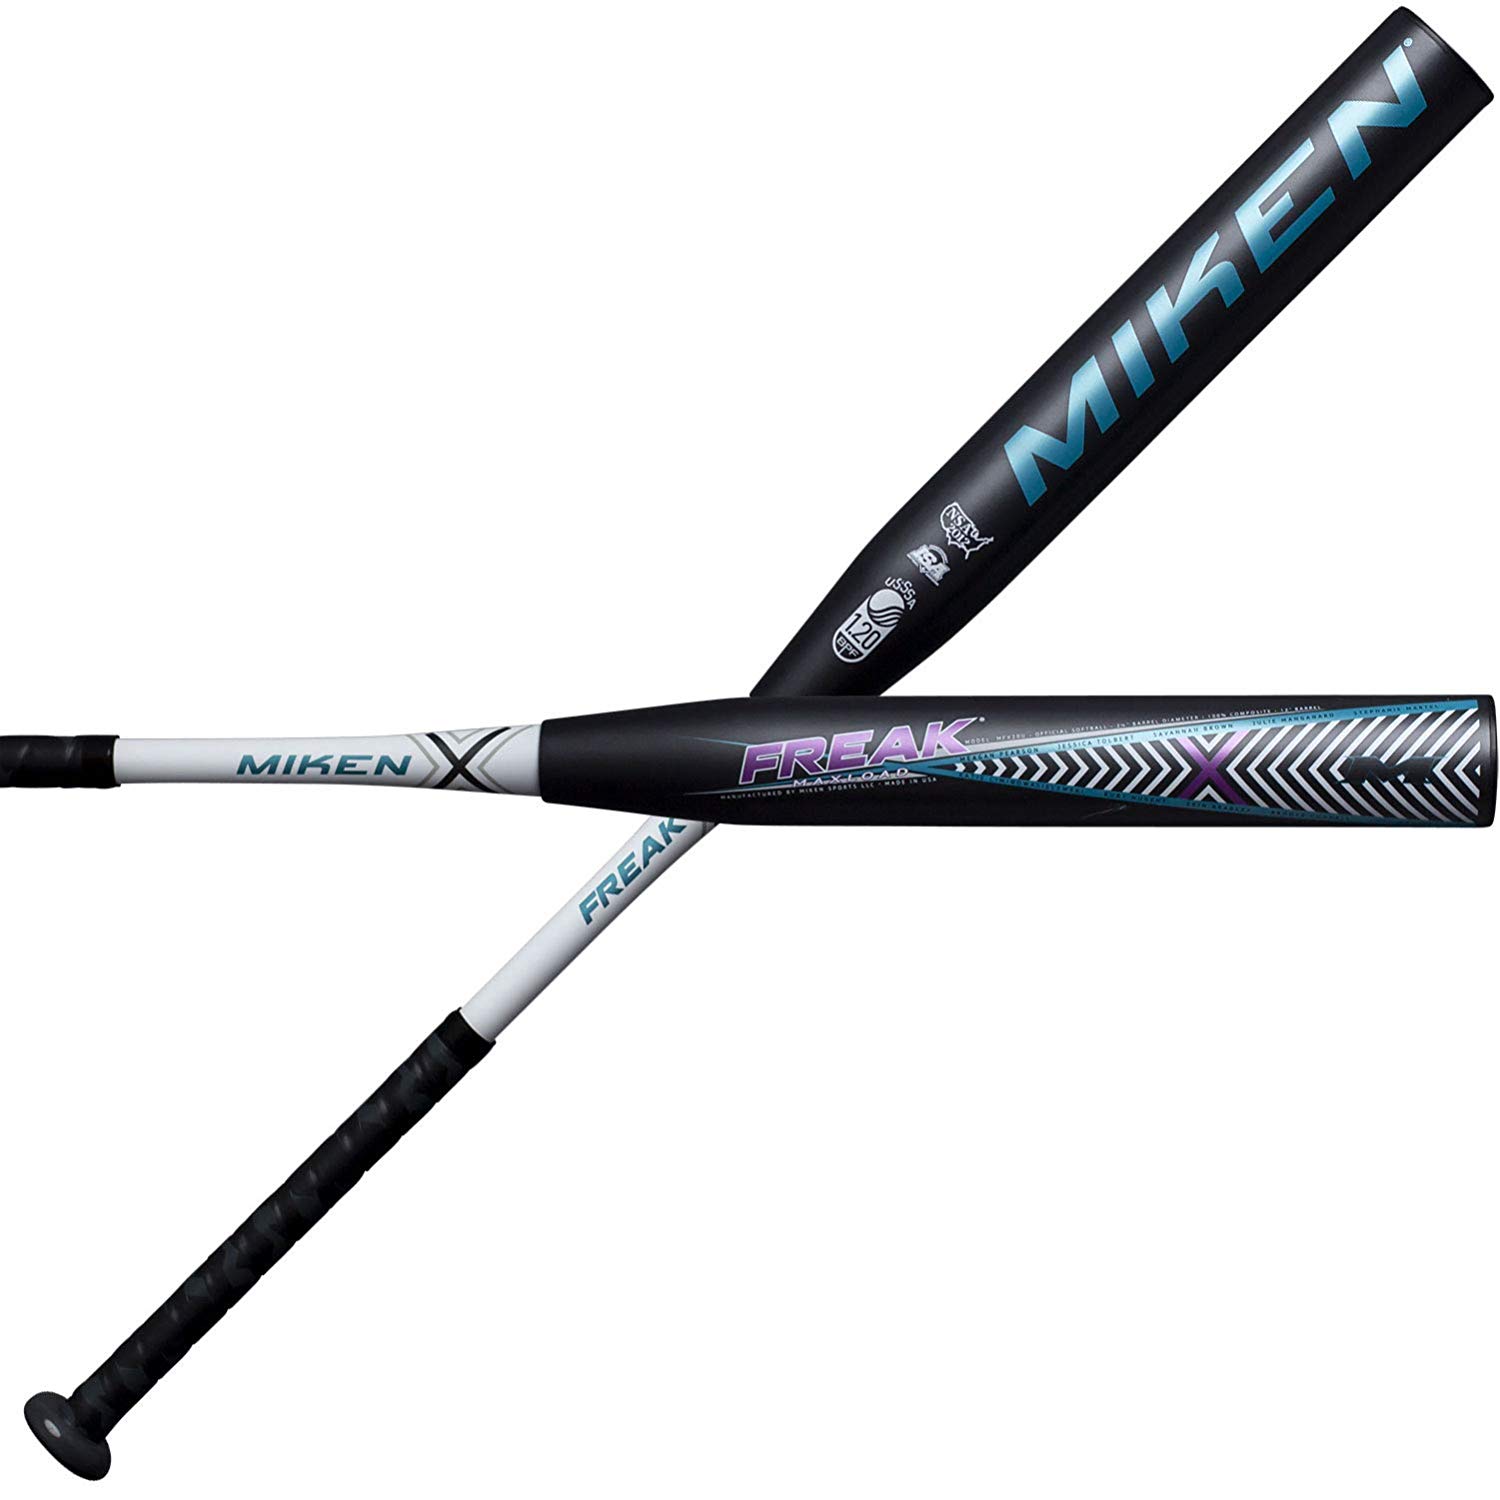 miken-2020-freak-x-maxload-female-usssa-slow-pitch-softball-bat-34-inch-26-oz MFX20U-3-26 Miken 658925043017 EXTENDED SWEET SPOT AND INCREASED FLEX due to 14 inch barrel